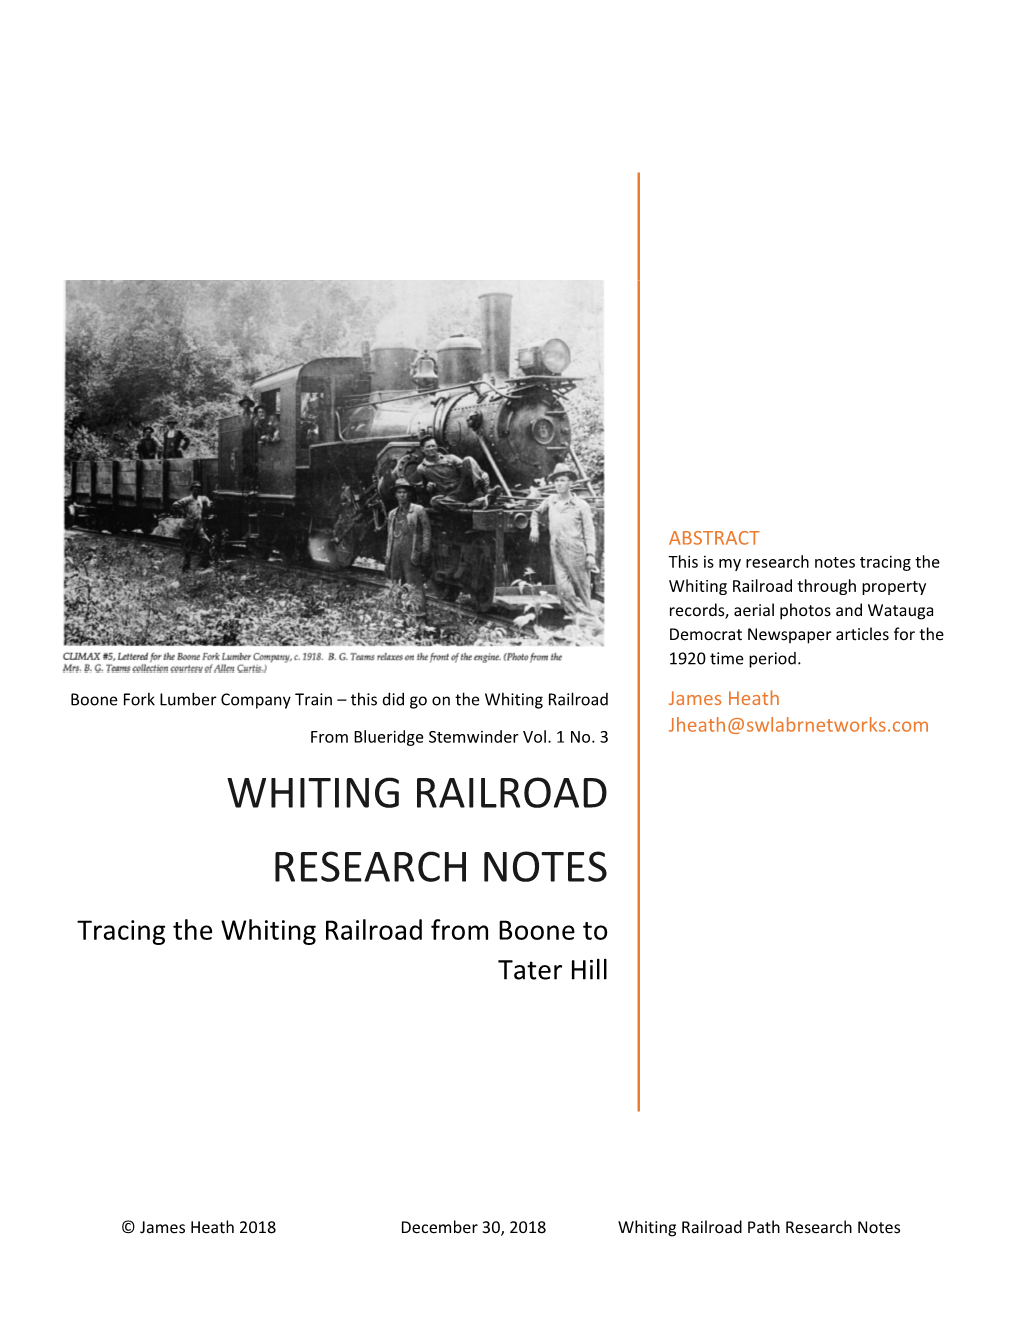 WHITING RAILROAD RESEARCH NOTES Tracing the Whiting Railroad from Boone to Tater Hill